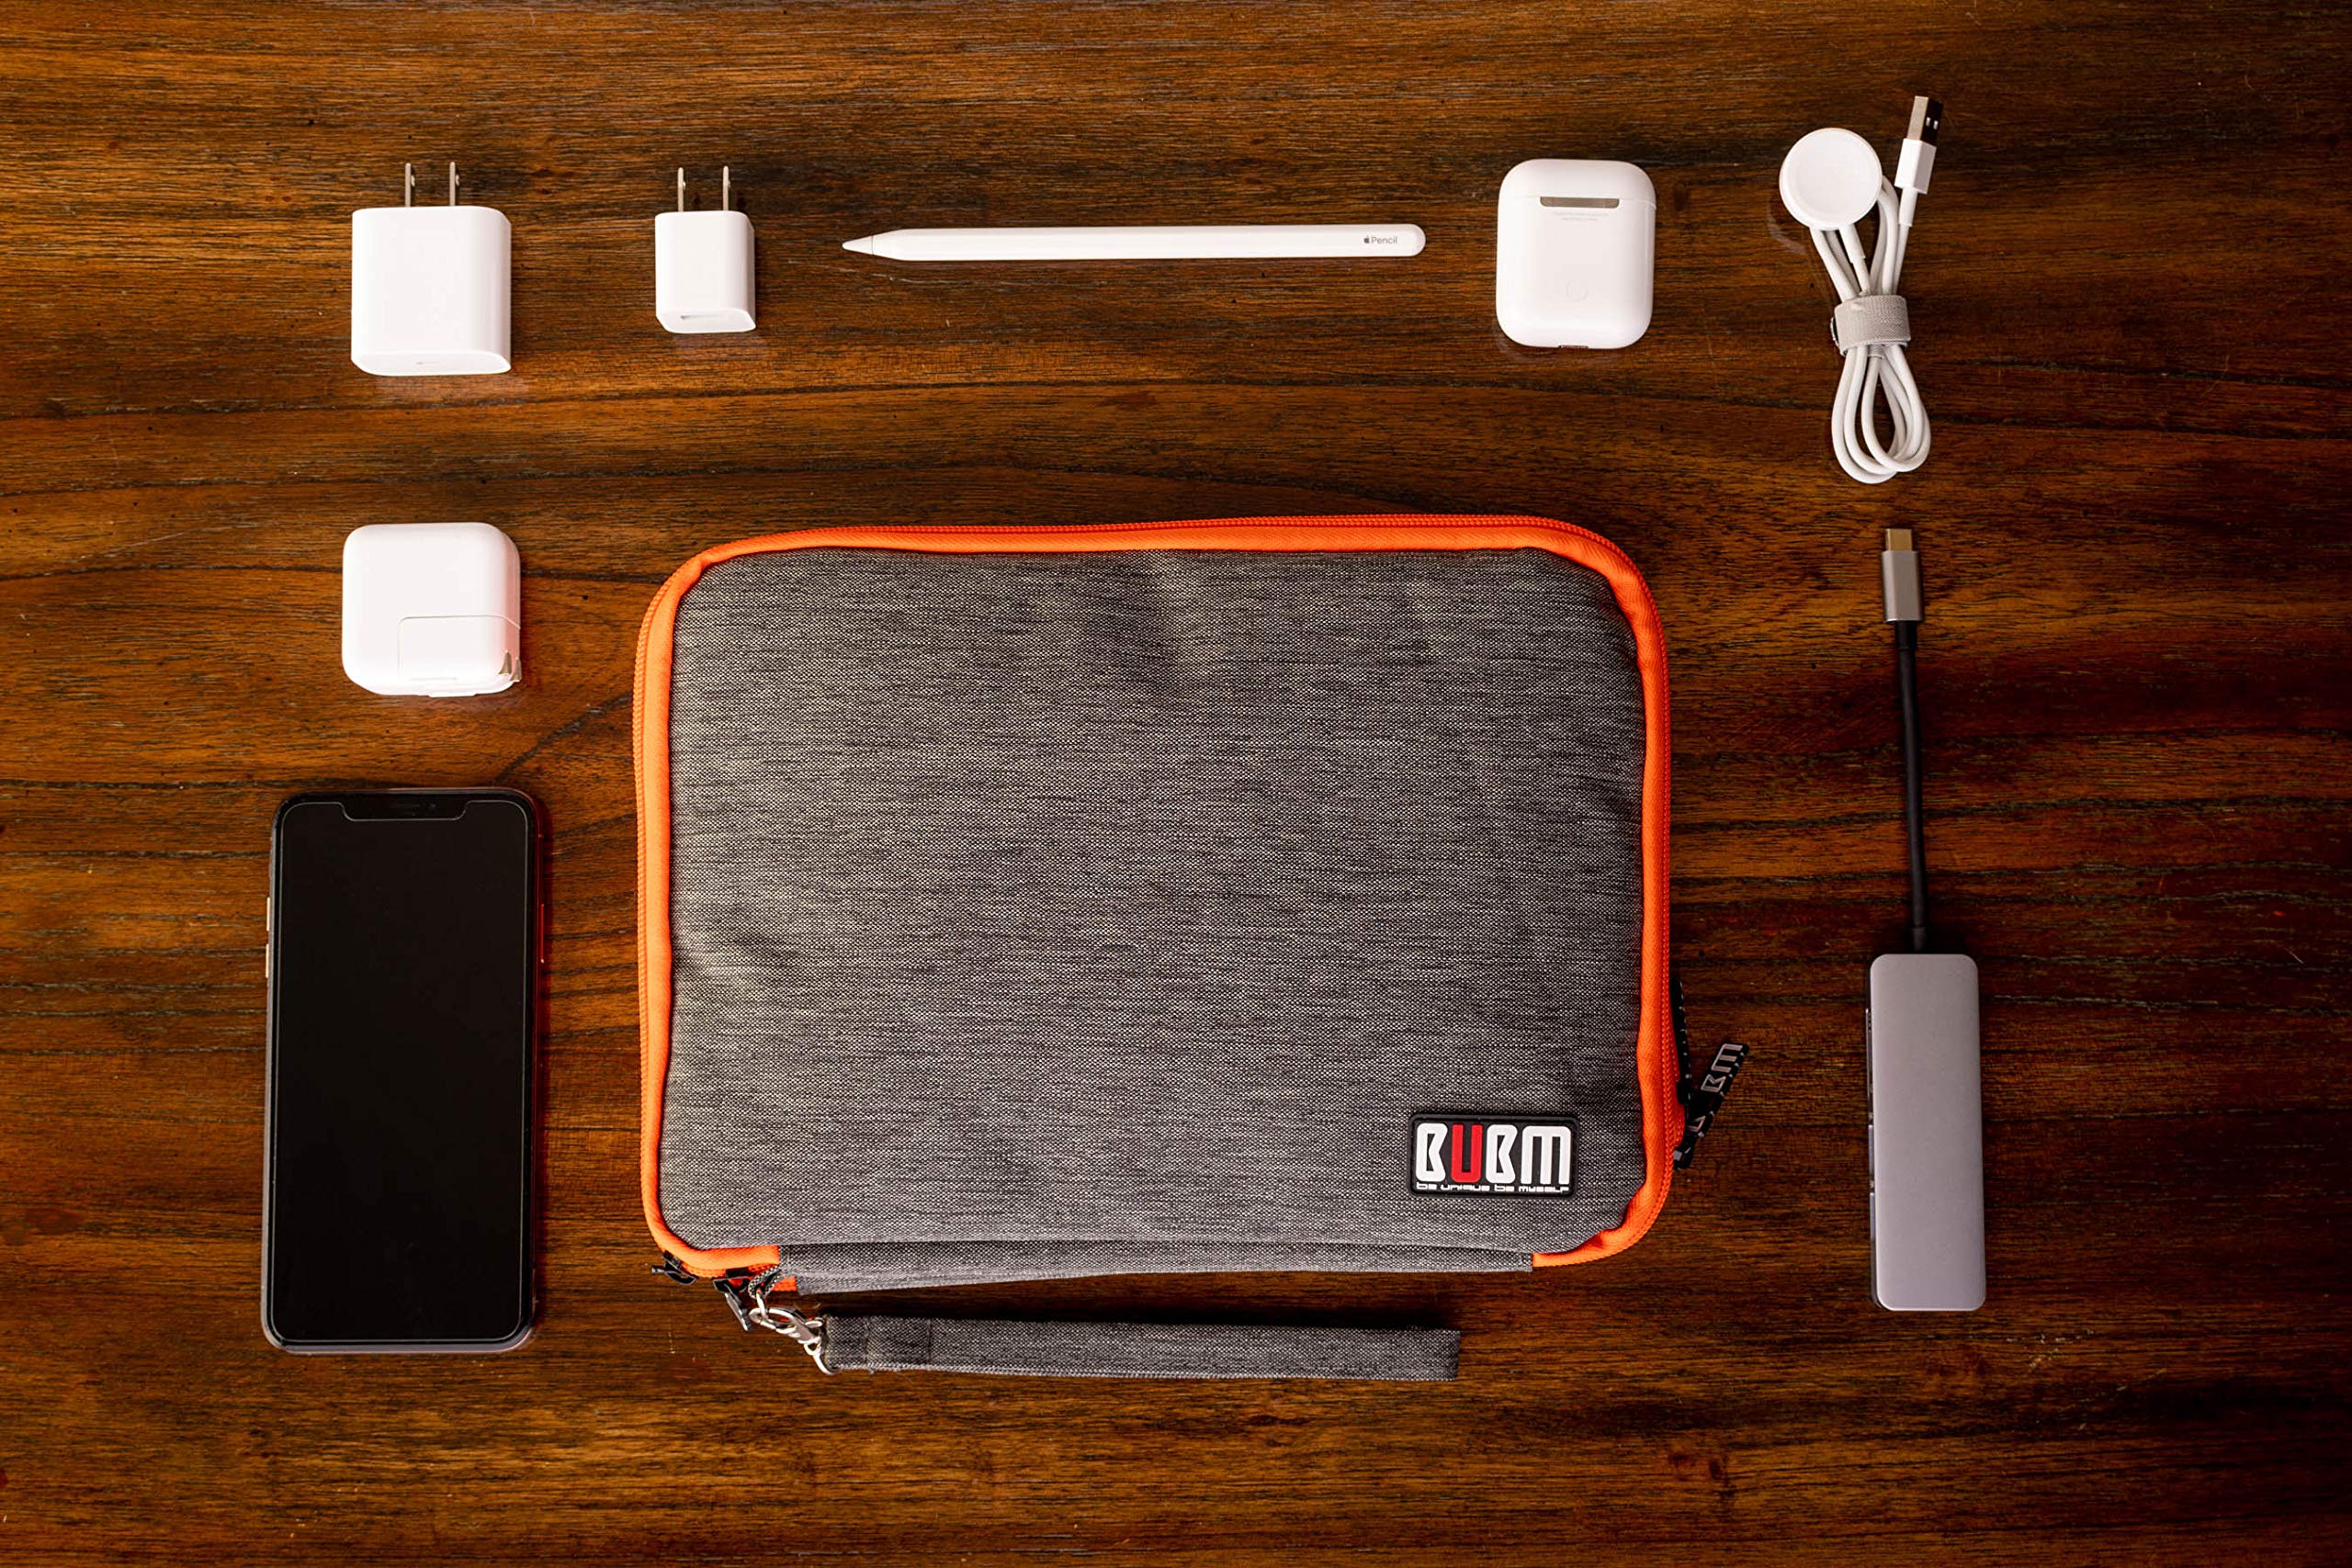 Three Layer Electronics Organizer and Travel Organizer for Tablet, Cables, and Chargers. Size XL Fit up to 10" Tablets. (Grey and Bright Orange)